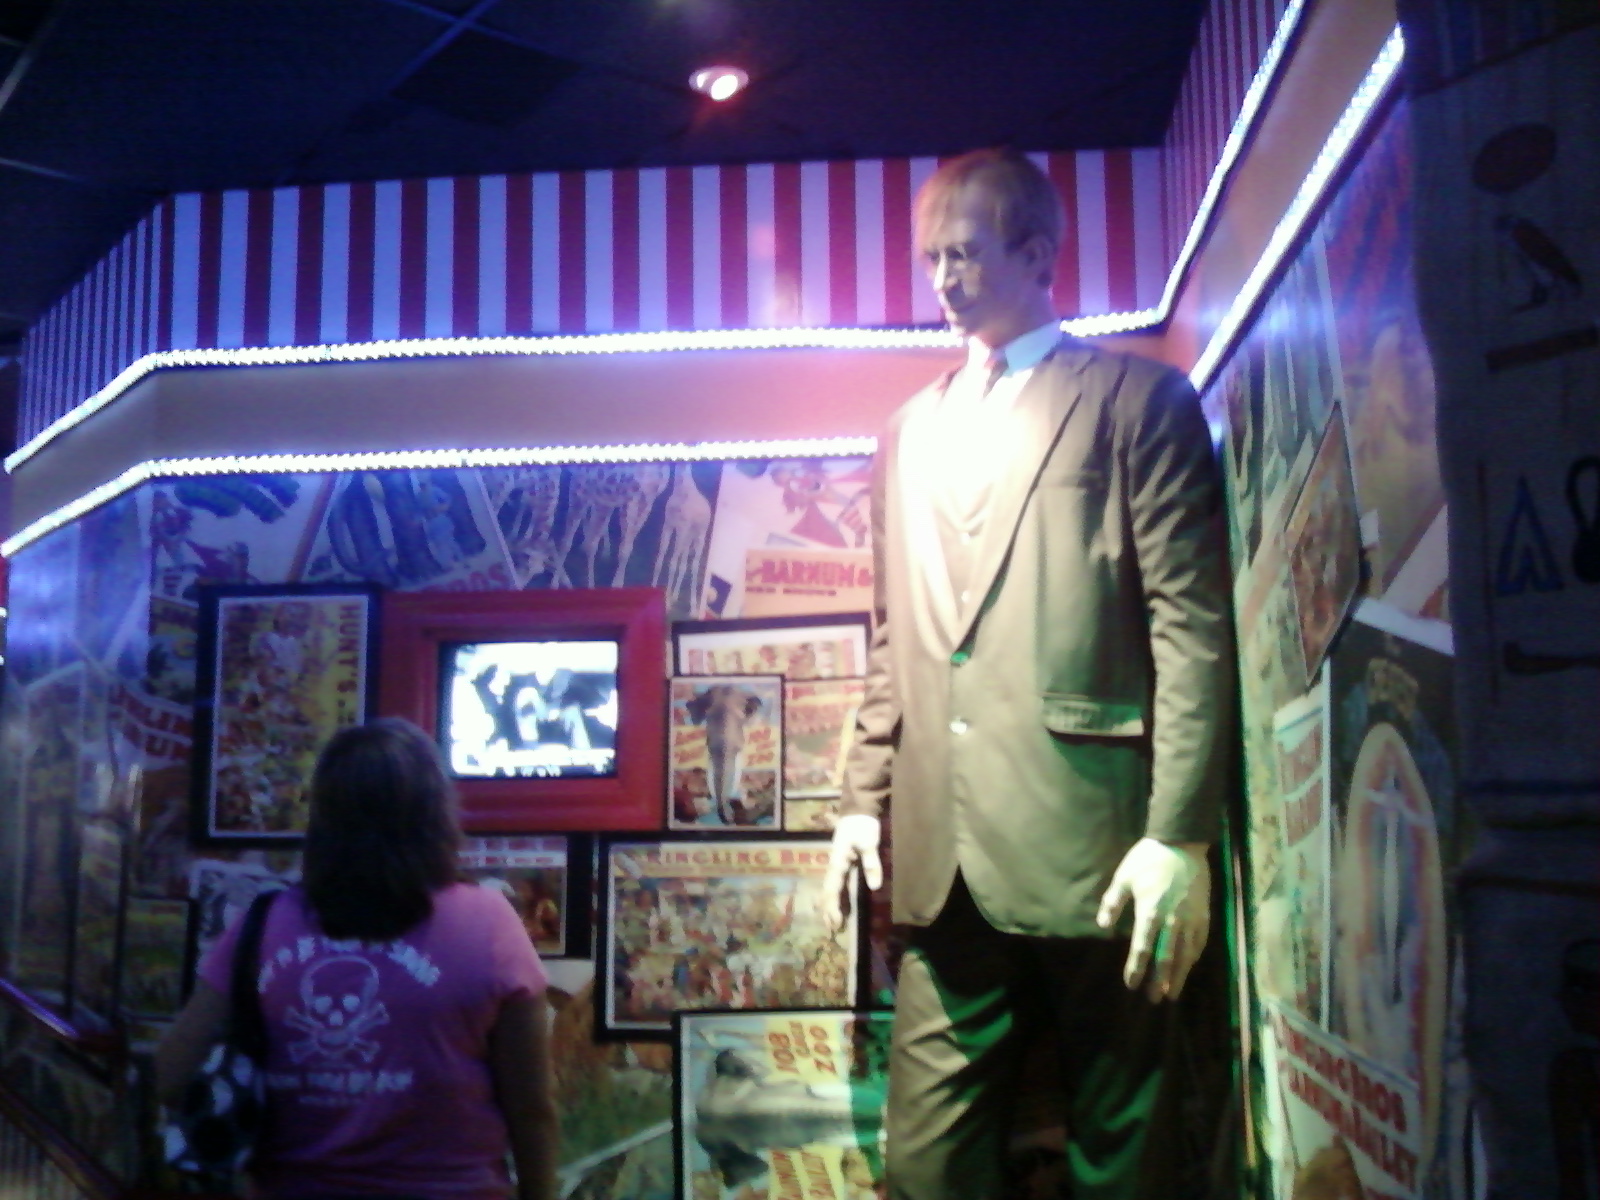 This is Robert Wadlow standing at 8'11" standing beside a lady at 5'6"